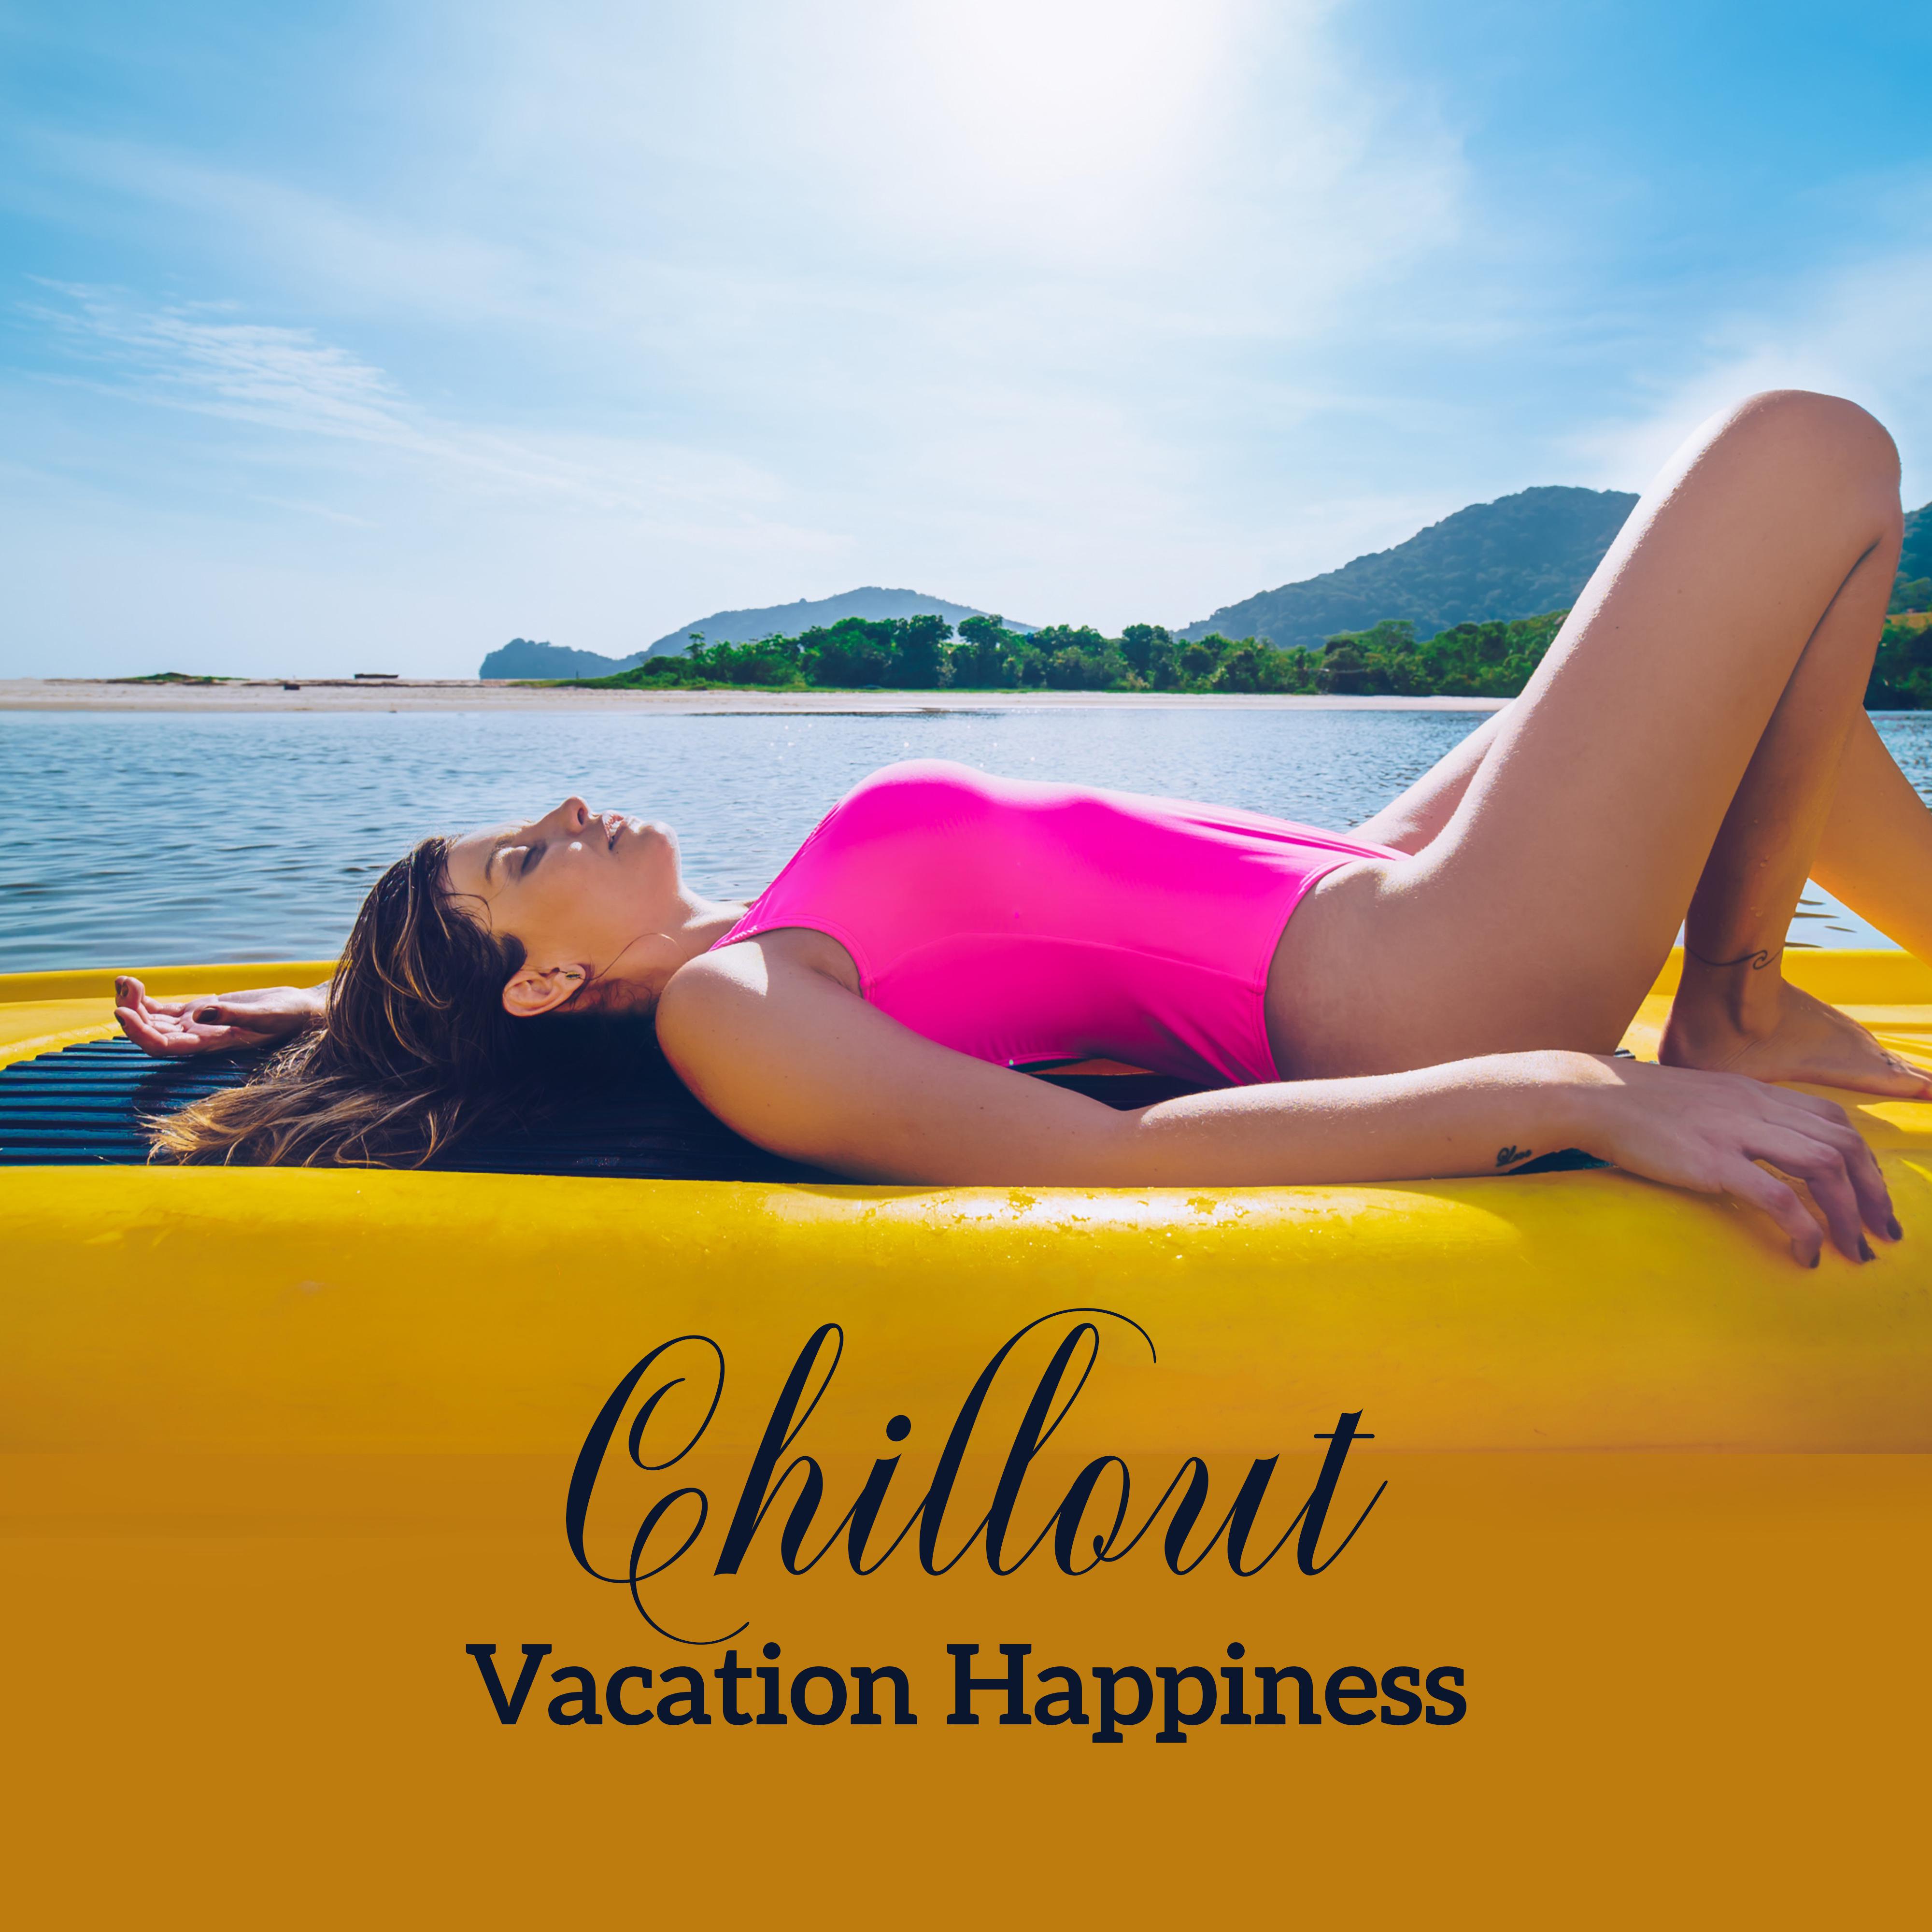 Chillout Vacation Happiness: 2019 Chill Out Music Compilation for Celebrating Summer Holidays, Deep Beats & Ambient Melodies for Total Relaxation, Beach Party Songs